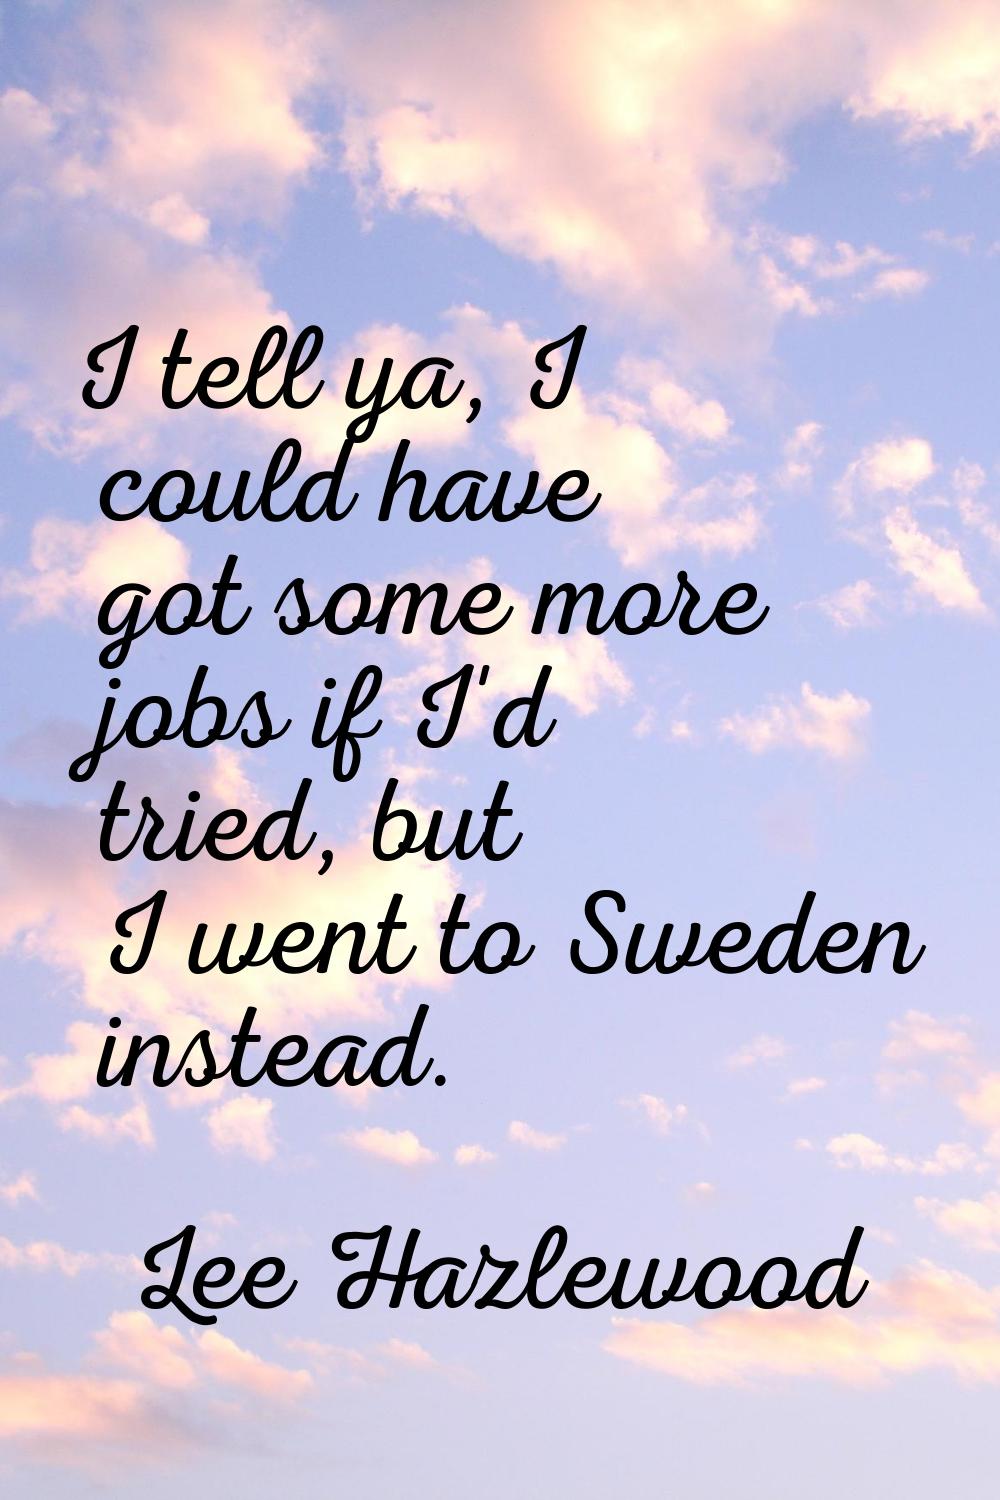 I tell ya, I could have got some more jobs if I'd tried, but I went to Sweden instead.